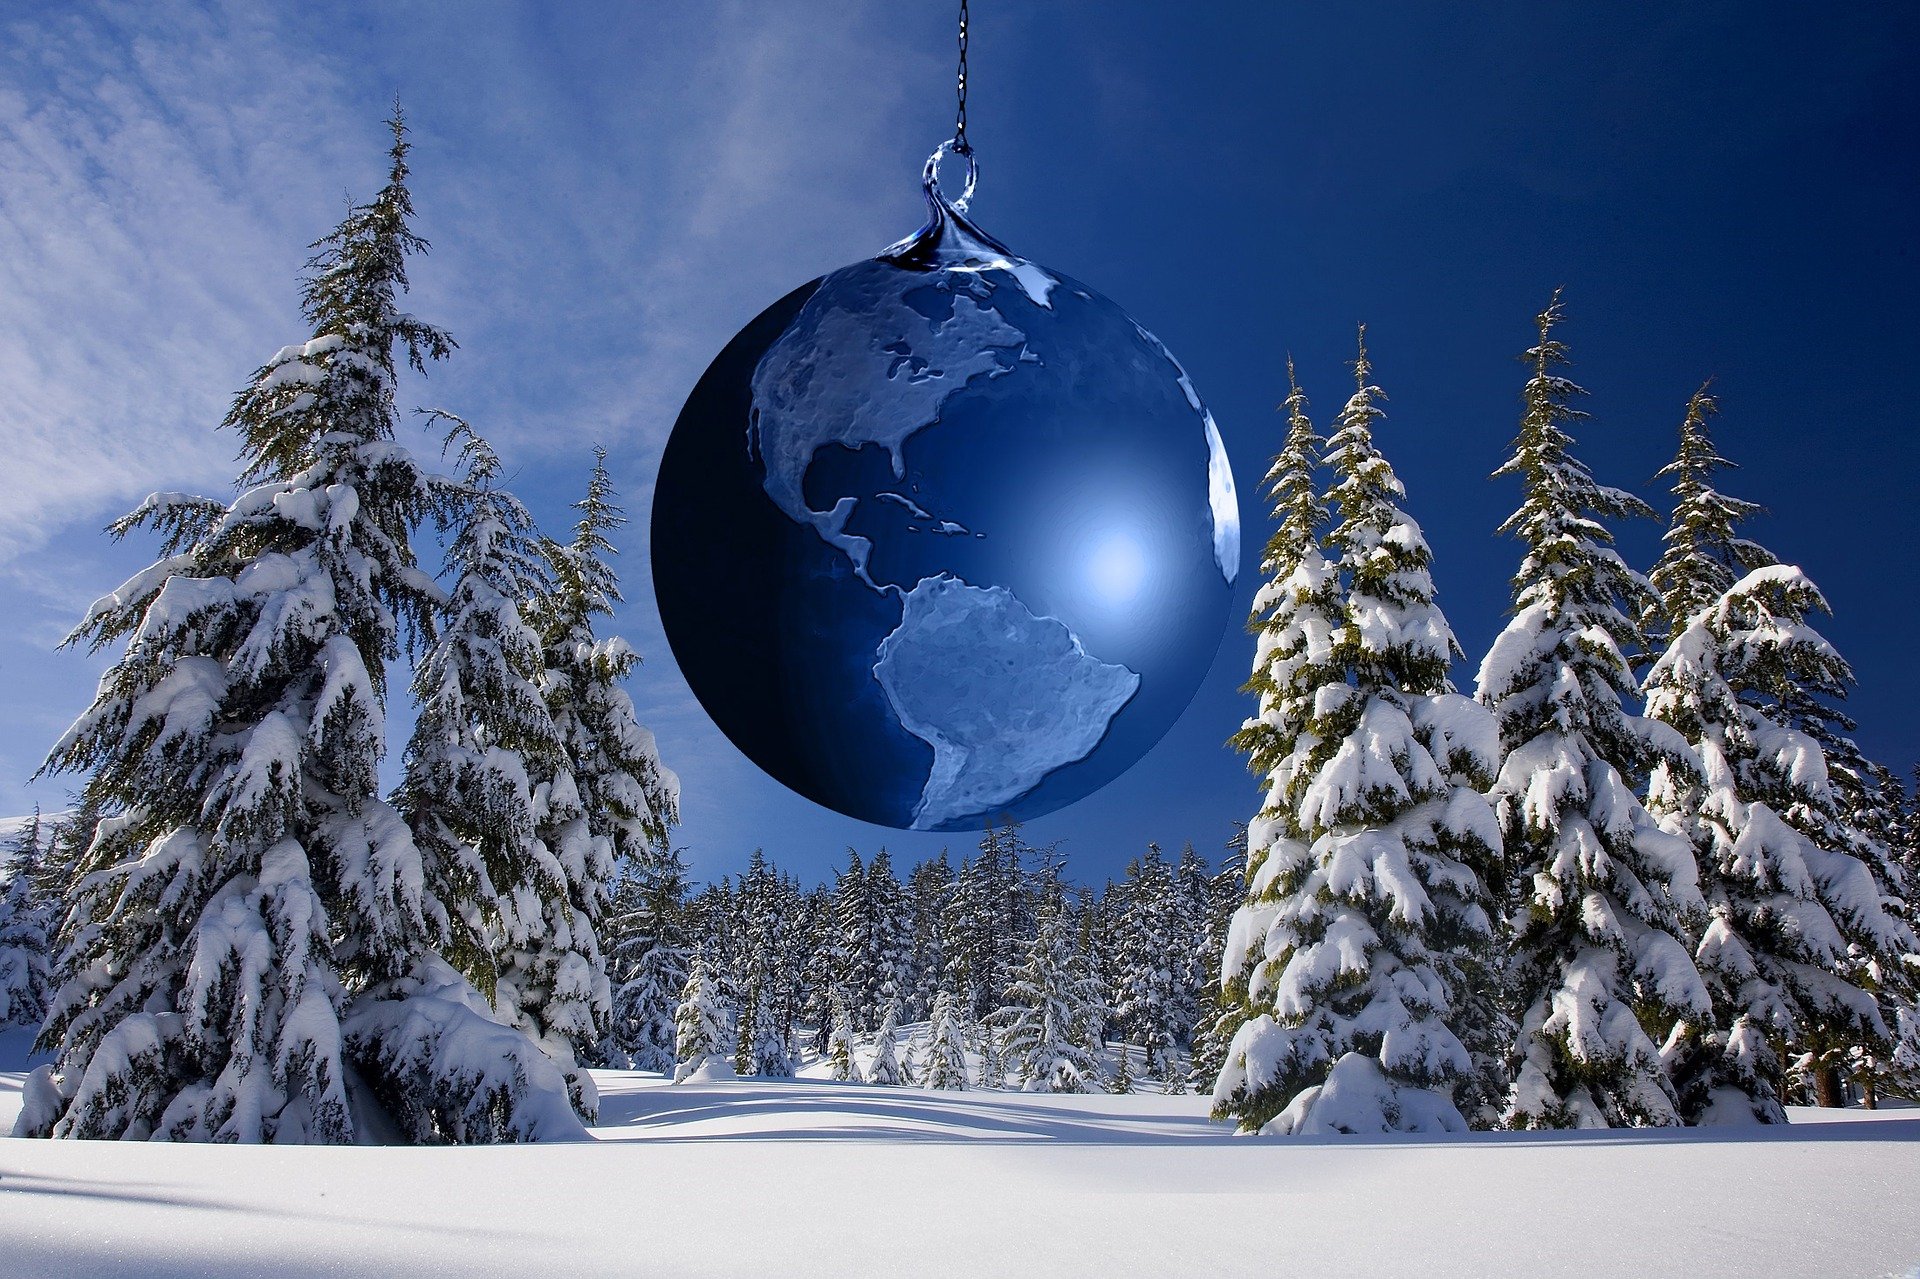 Six Ways to Have Your Most Environmentally-Friendly Christmas Ever